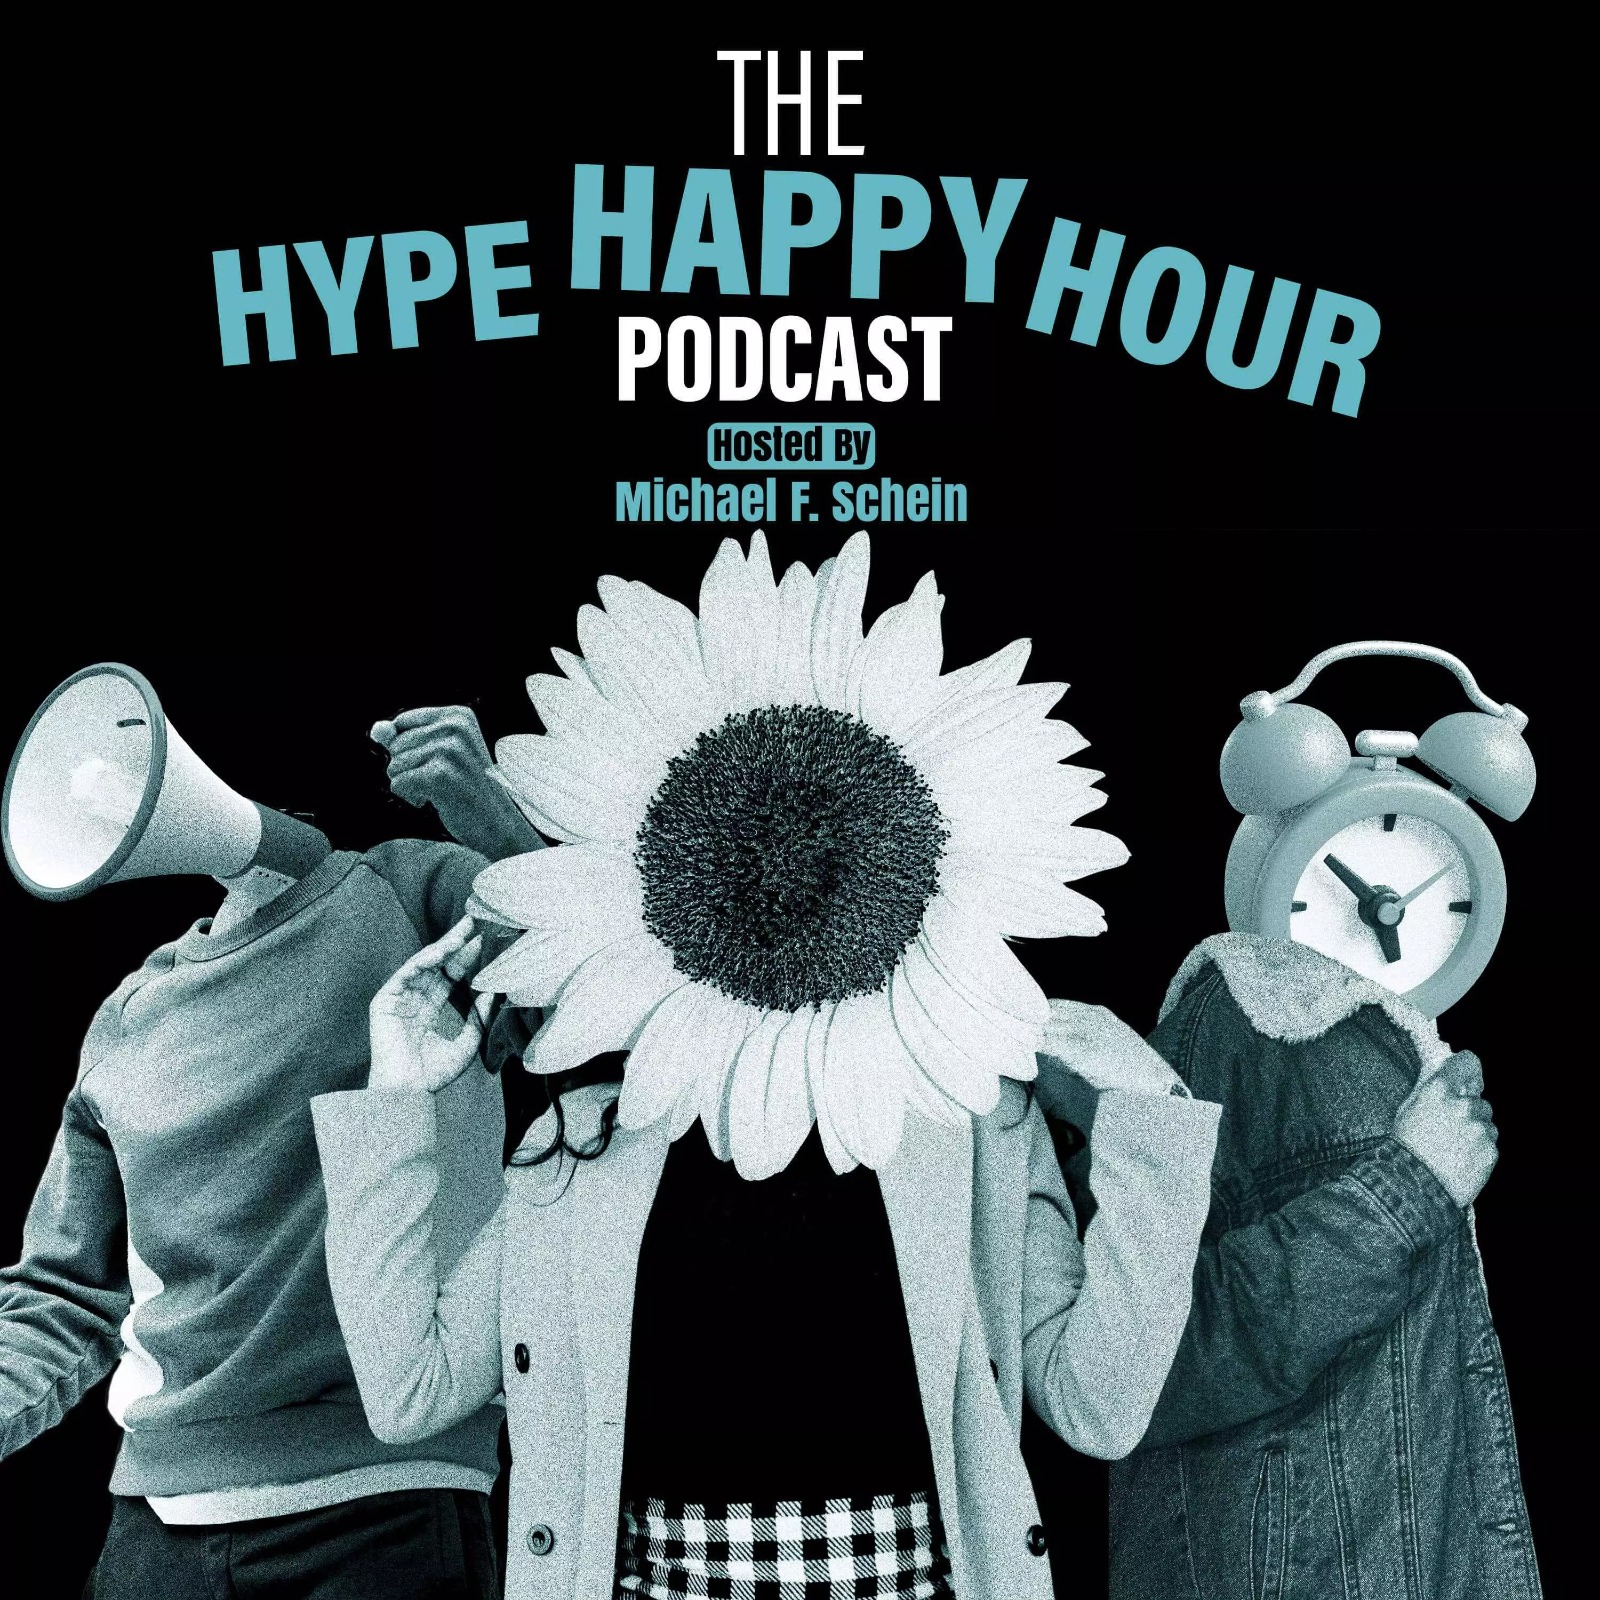 The Hype Happy Hour Podcast.jpeg